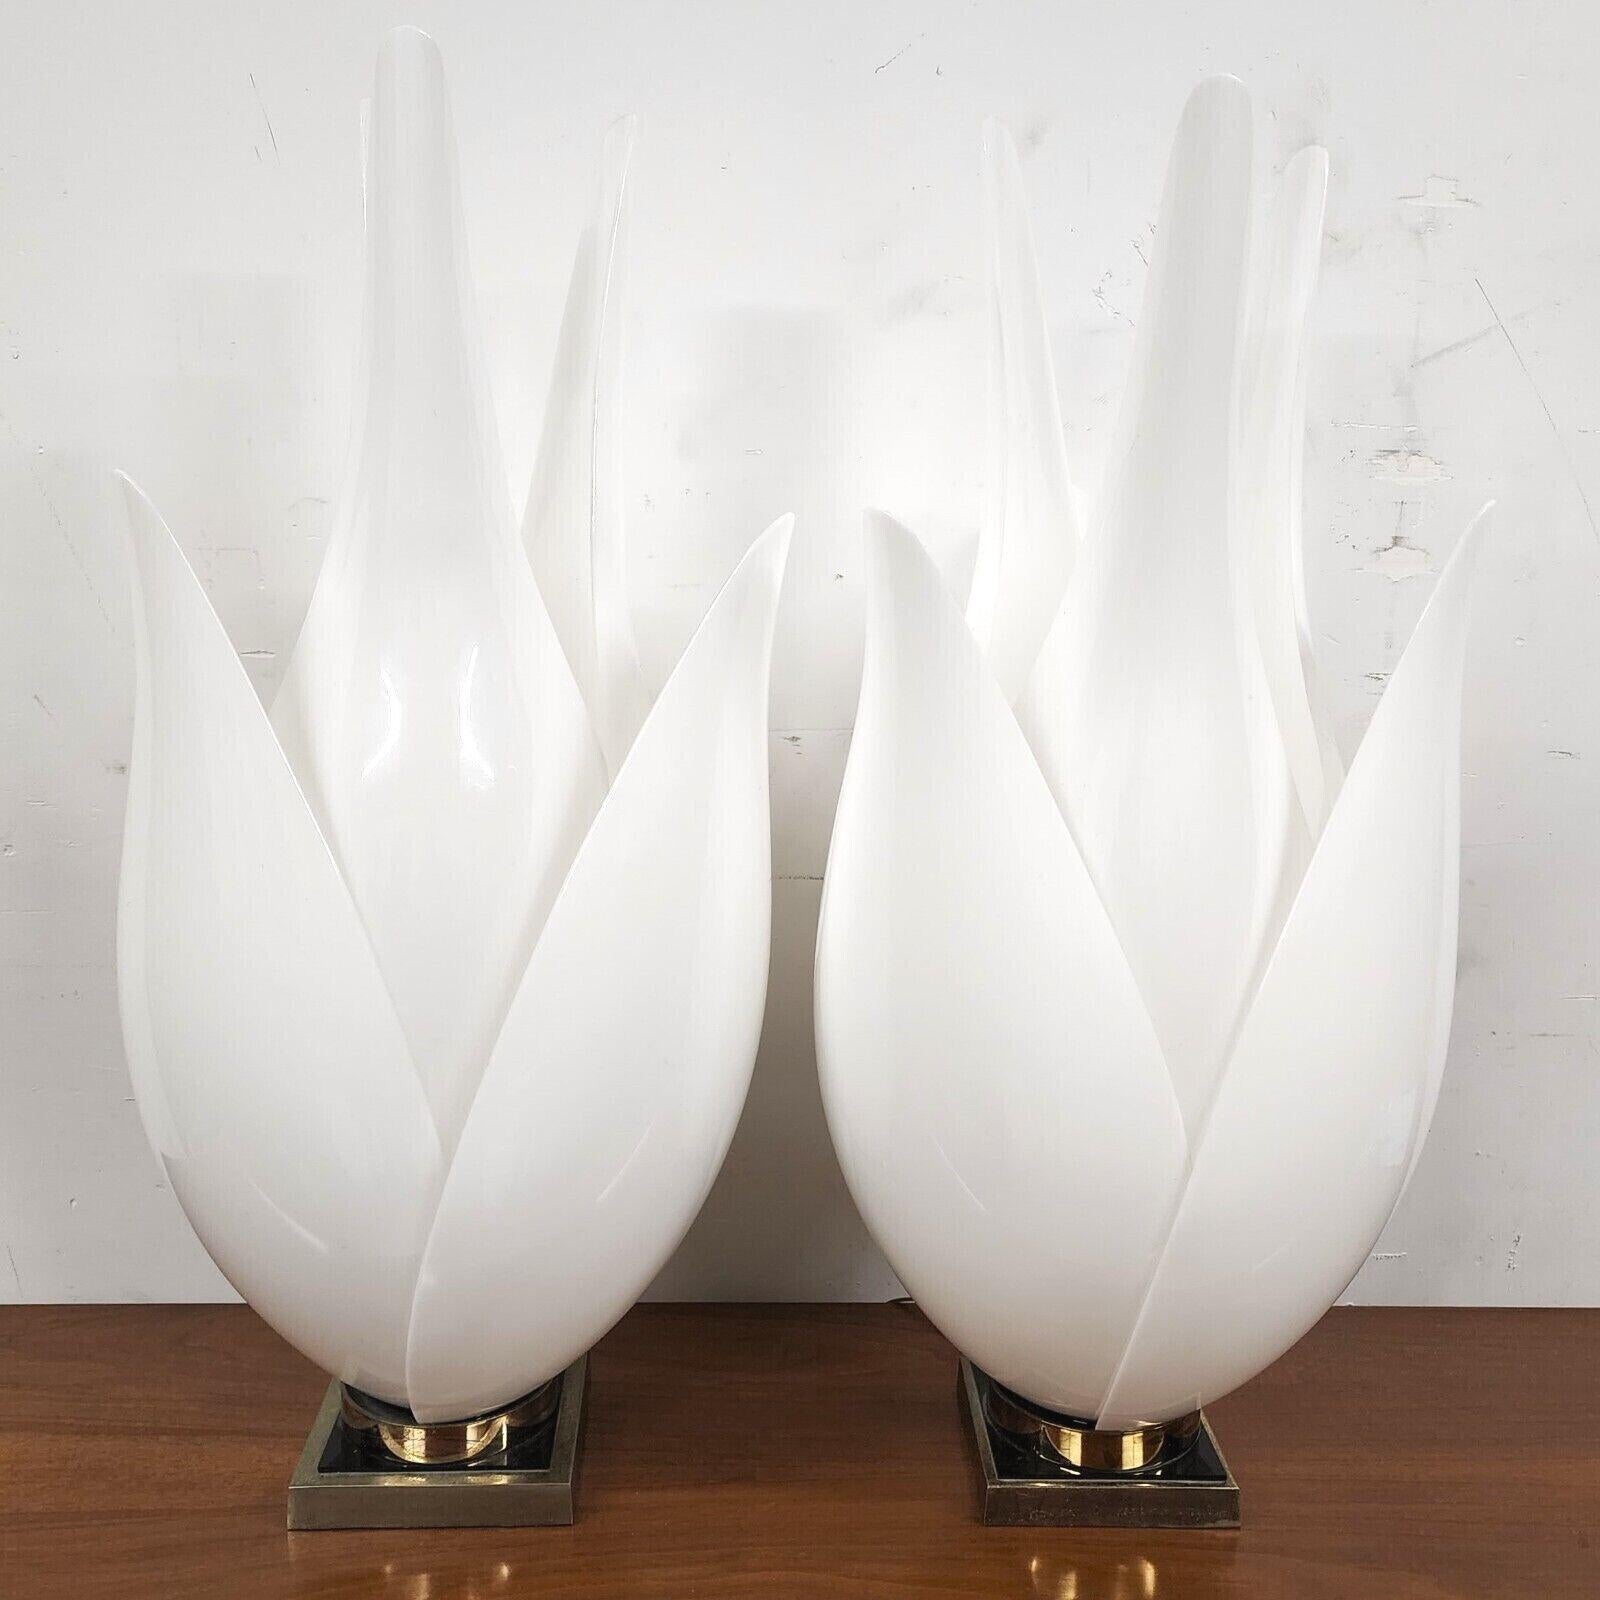 Offering One Of Our Recent Palm Beach Estate Fine Lighting Acquisitions Of A
Pair of Larger 1970s ROUGIER Floriform Tulip Lamps 

Measurements
34